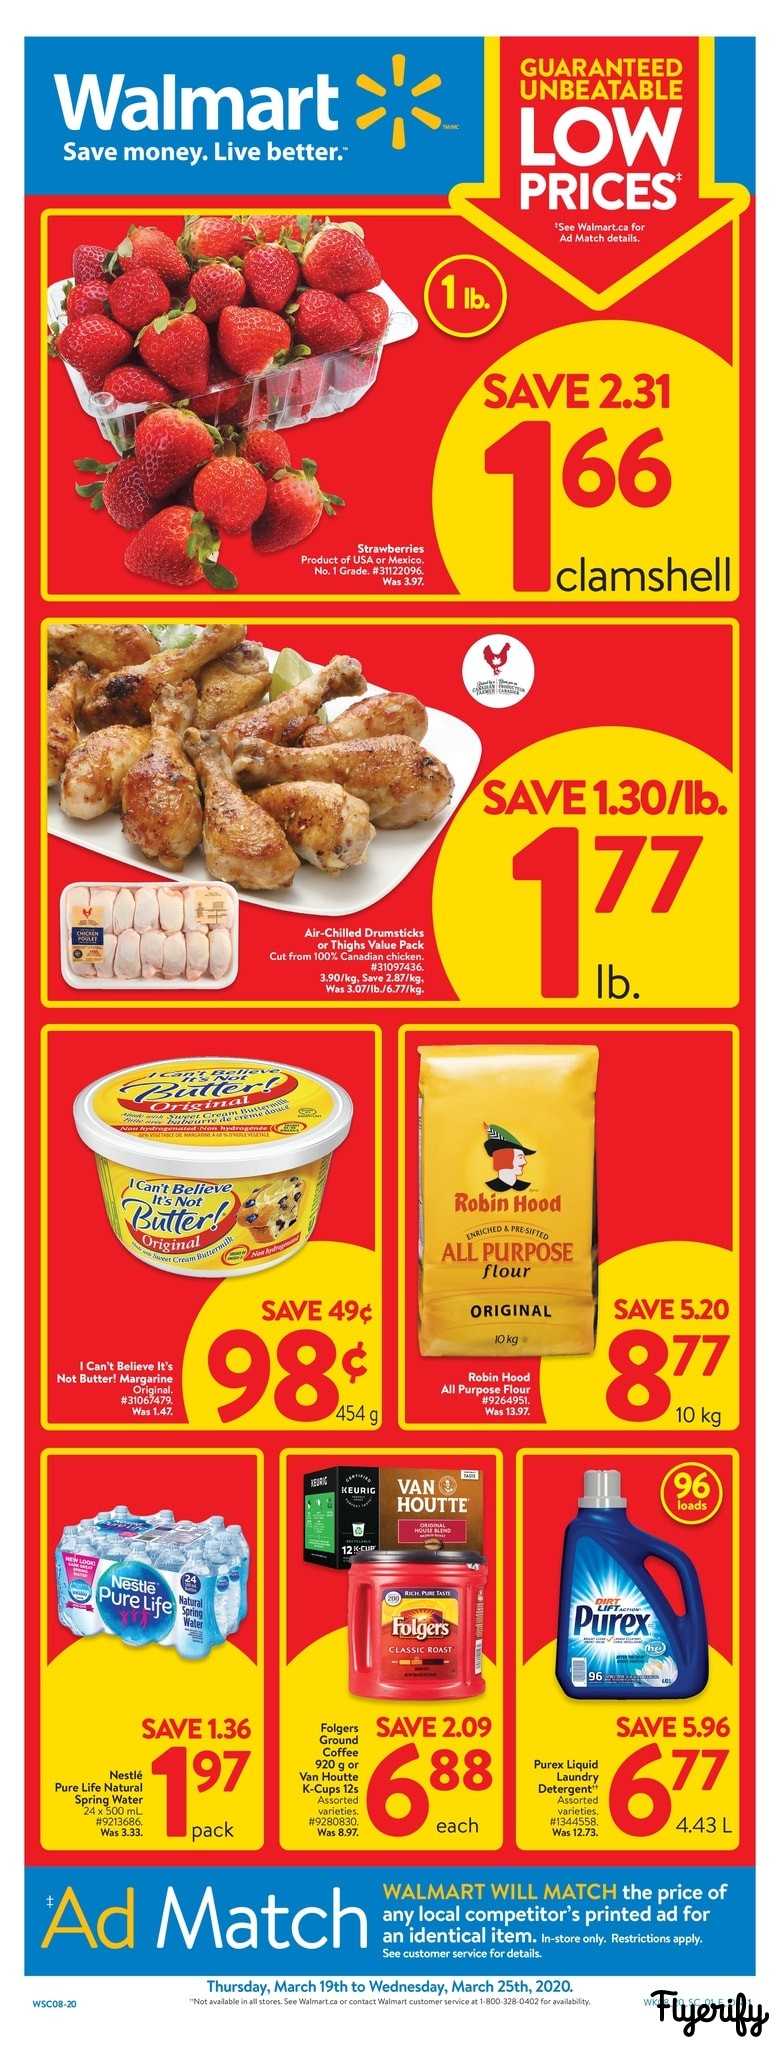 Walmart Supercentre On Flyer March 19 To 2521 